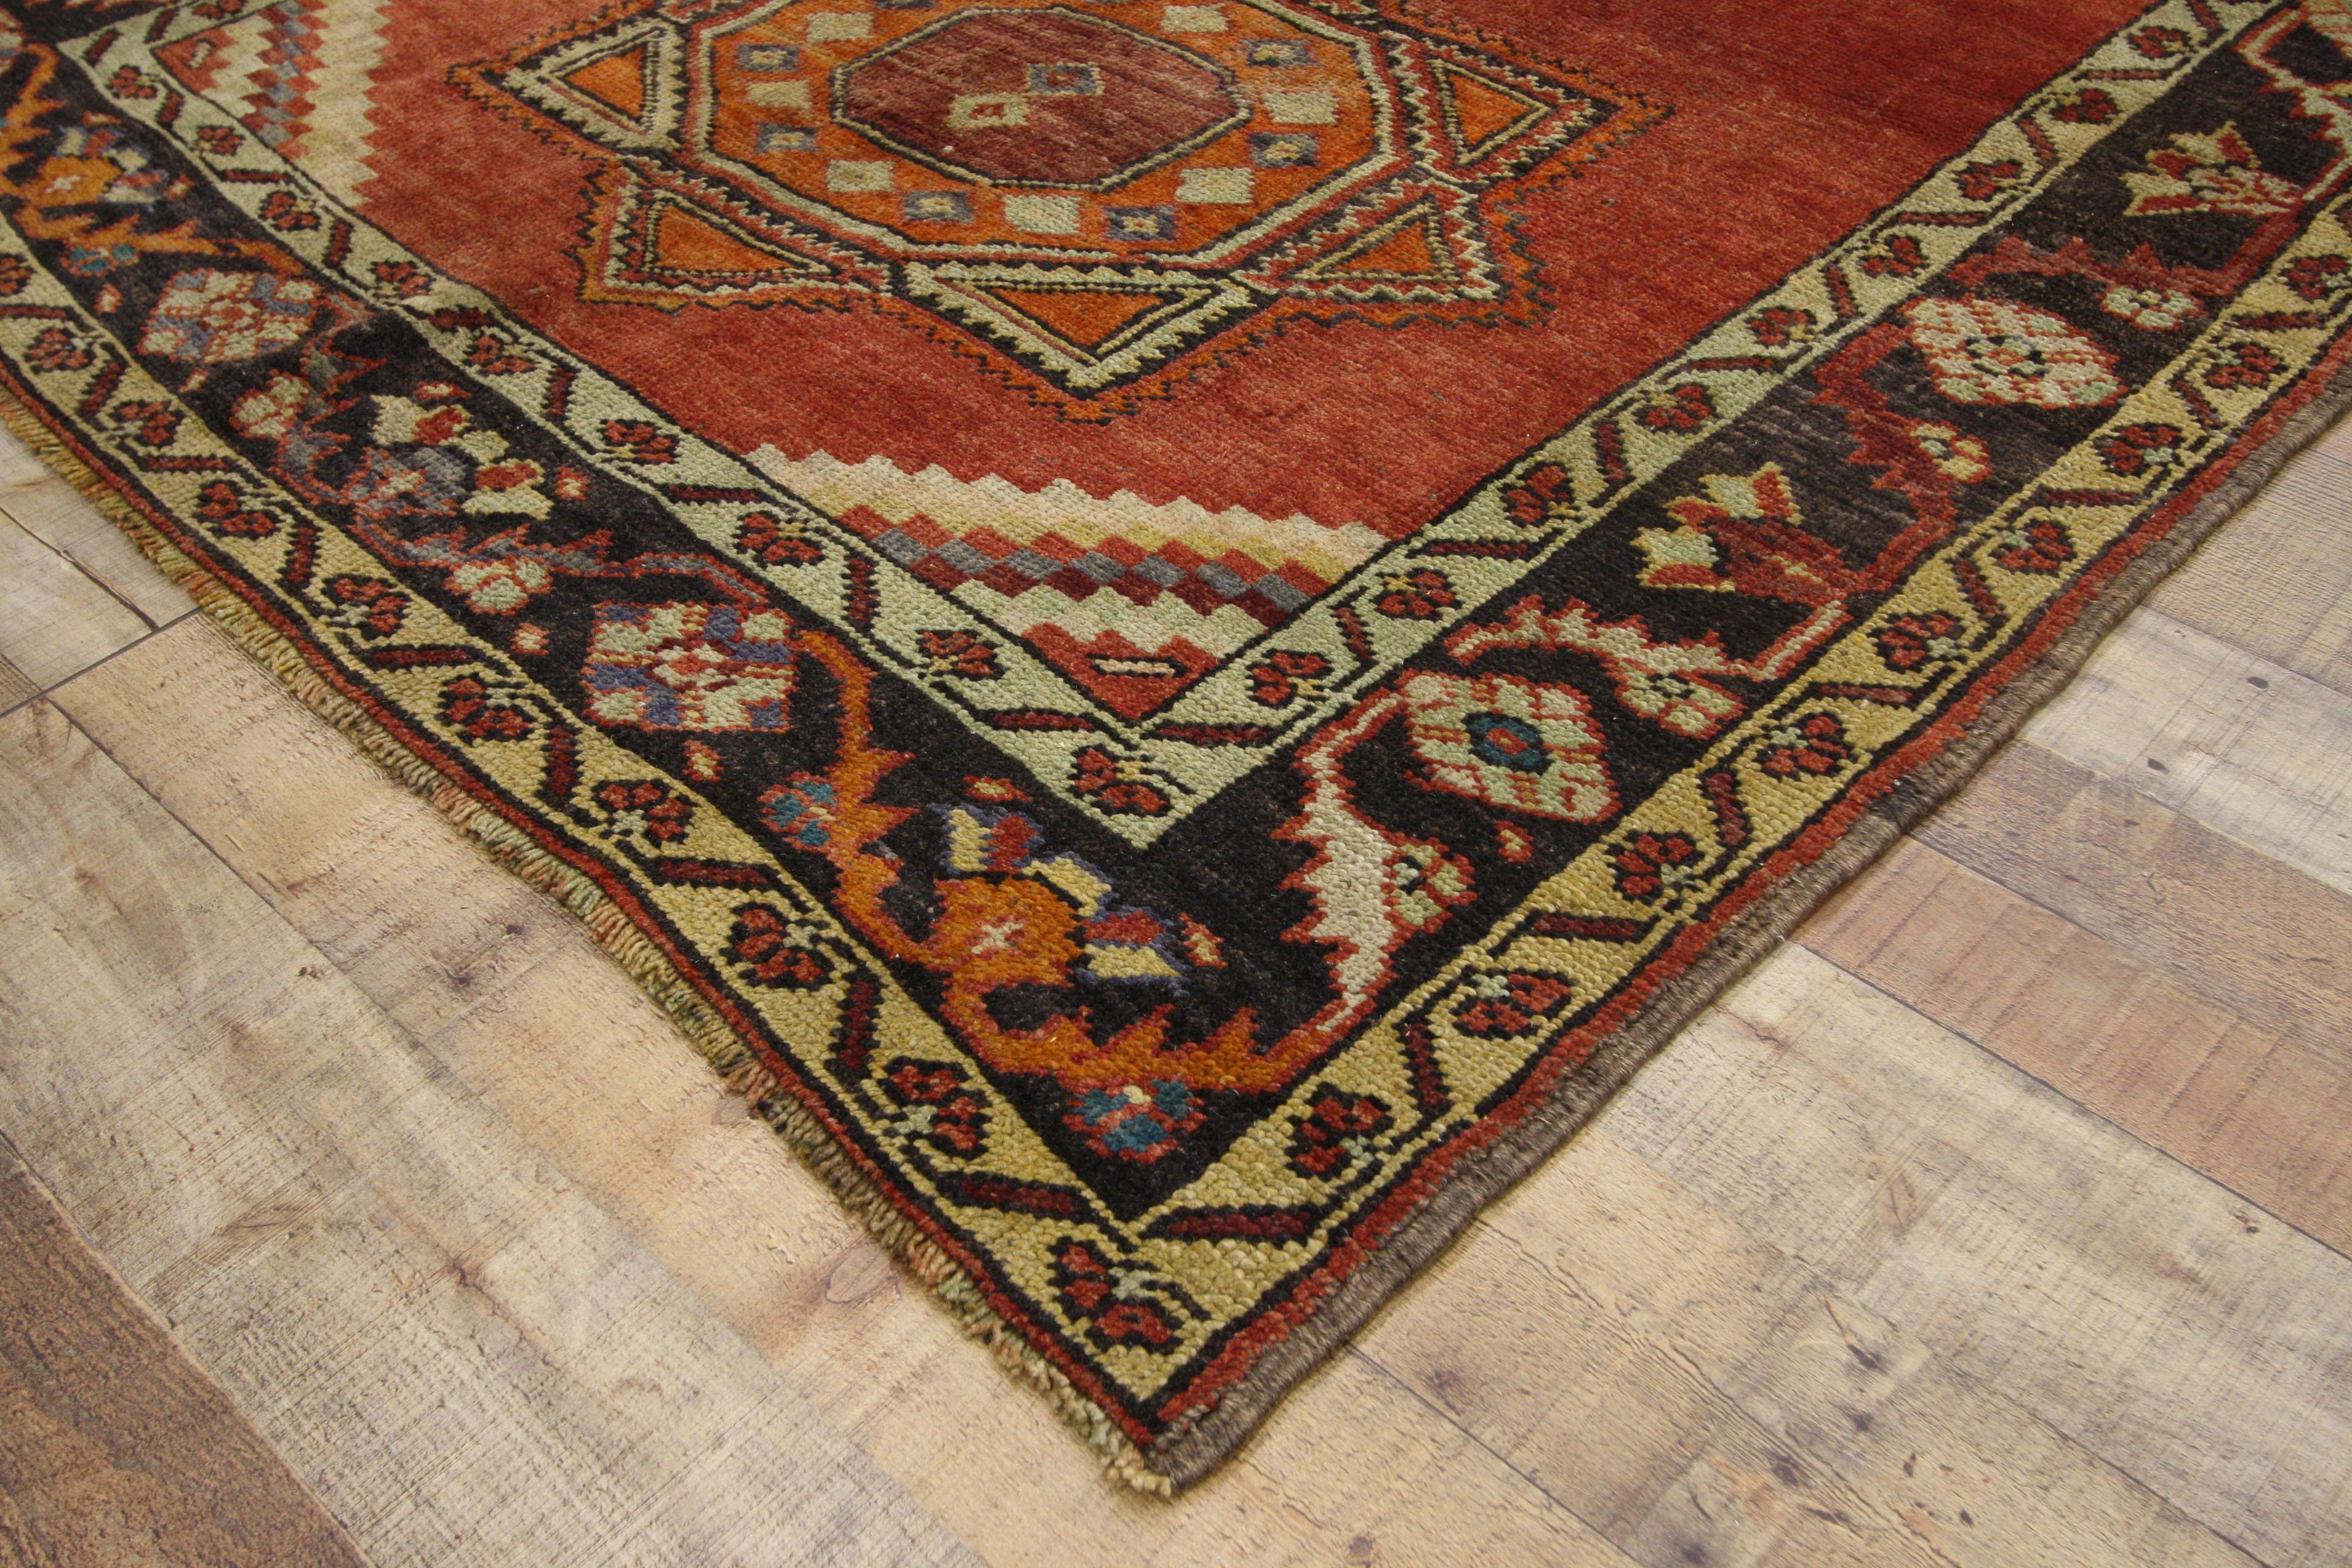 52399 Vintage Turkish Oushak hallway runner with Craftsman Tribal style. This hand knotted wool vintage Turkish Oushak runner features three serrated-edged octagram medallions spread across the centre of an abrashed red field. The octagram, an